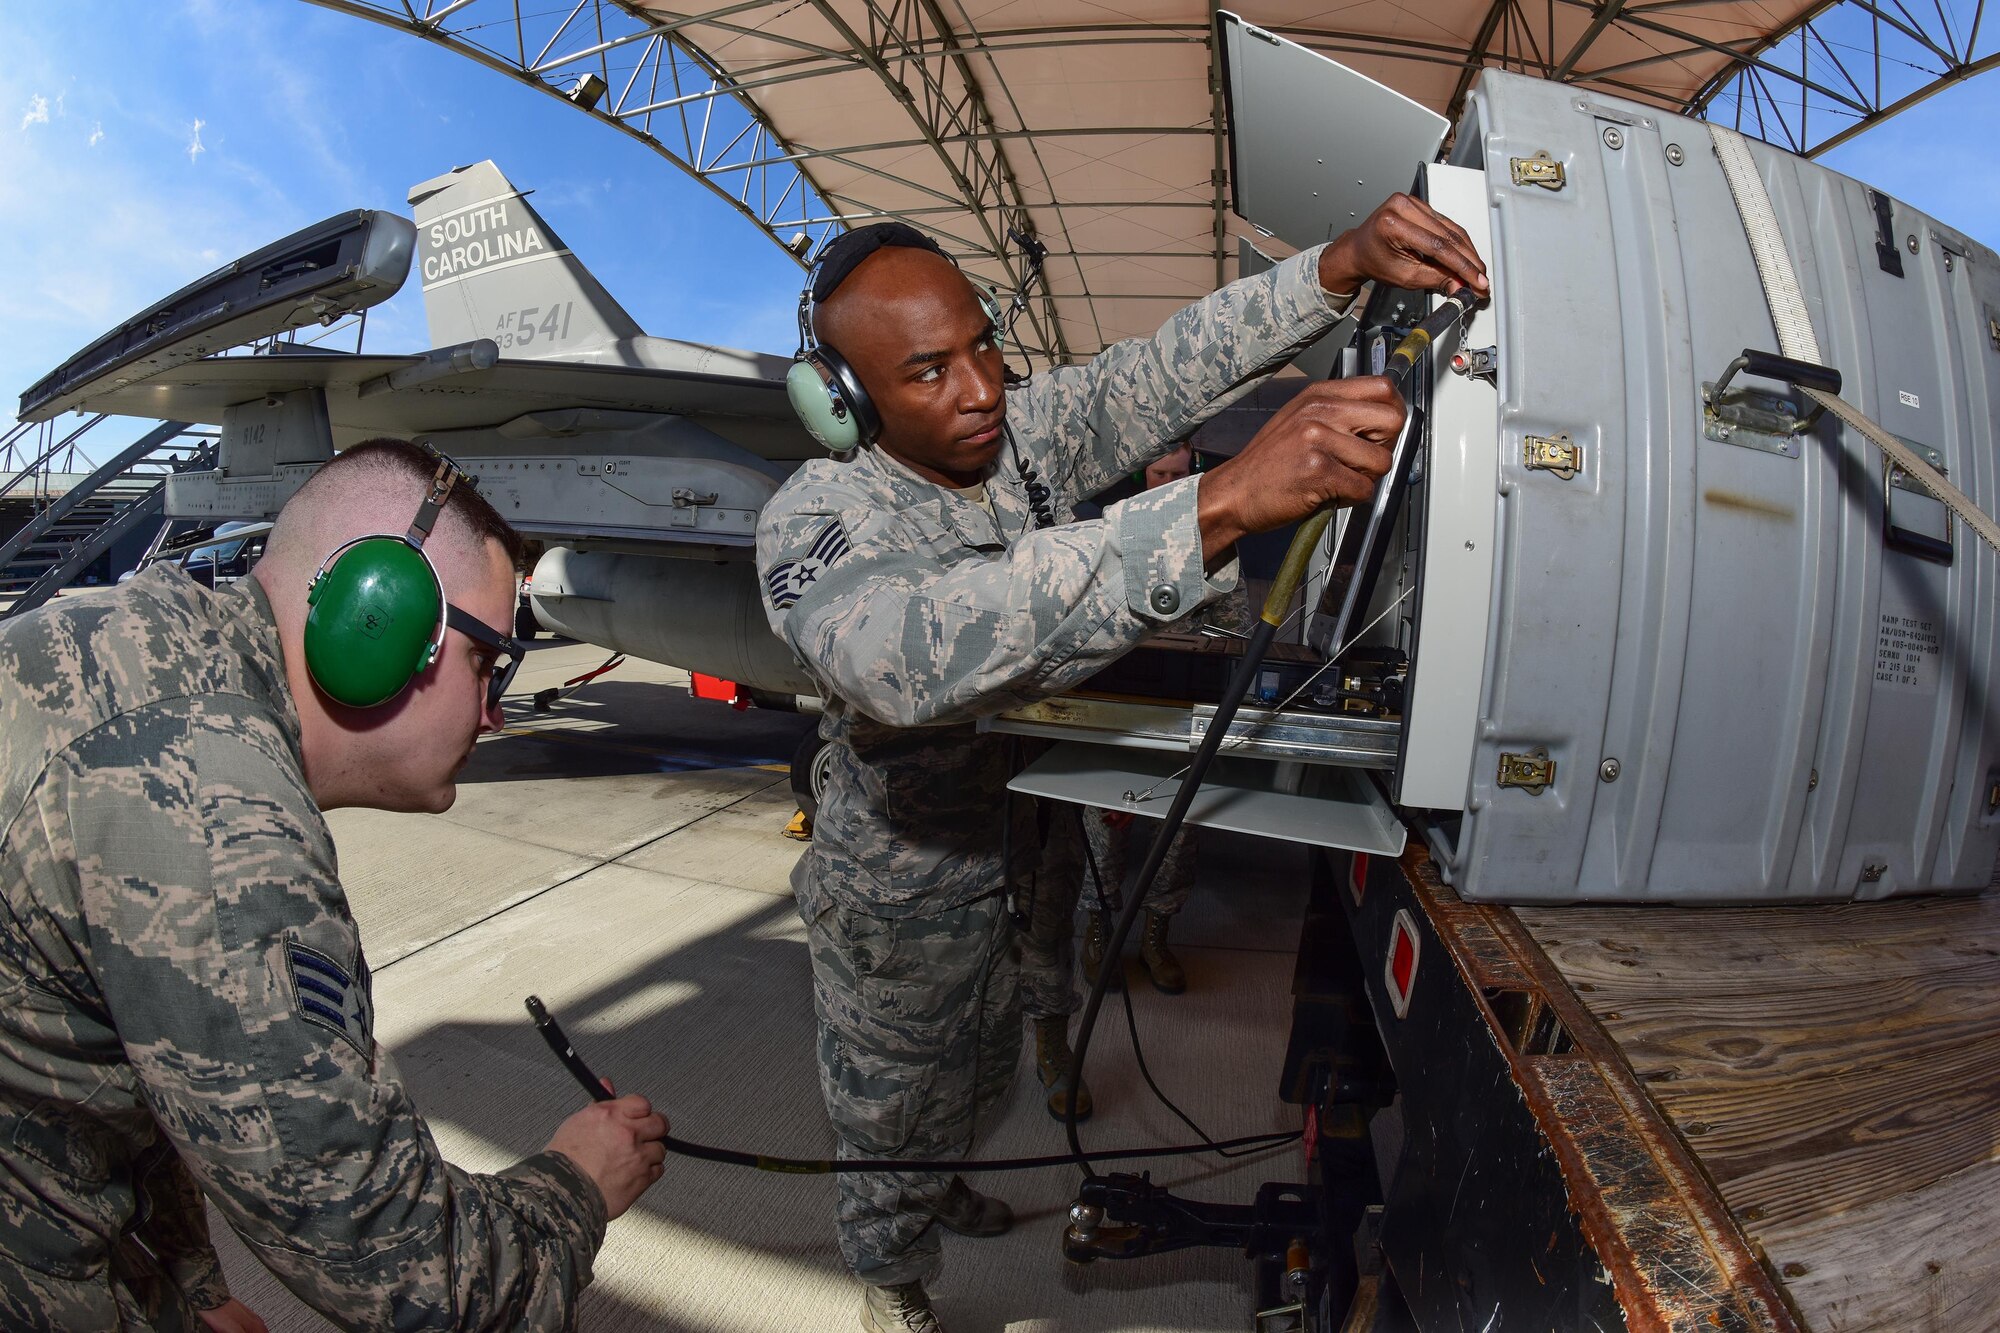 U.S. Air Force Staff Sgt. Timothy Harris-Bey, right, and Senior Airman Brock Latham, both inspectors from the 16th Electronic Warfare Squadron at Eglin Air Force Base, Fla., run tests on one of the South Carolina Air National Guard’s F-16 Fighting Falcons at McEntire Joint National Guard Base, Jan. 18, 2017. The electronic warfare systems used on S.C. Air National Guard F-16 Fighting Falcons underwent an annual Combat Shield inspection; ensuring testing and maintenance requirements are properly conducted. (U.S. Air National Guard photo by Airman 1st Class Megan Floyd)